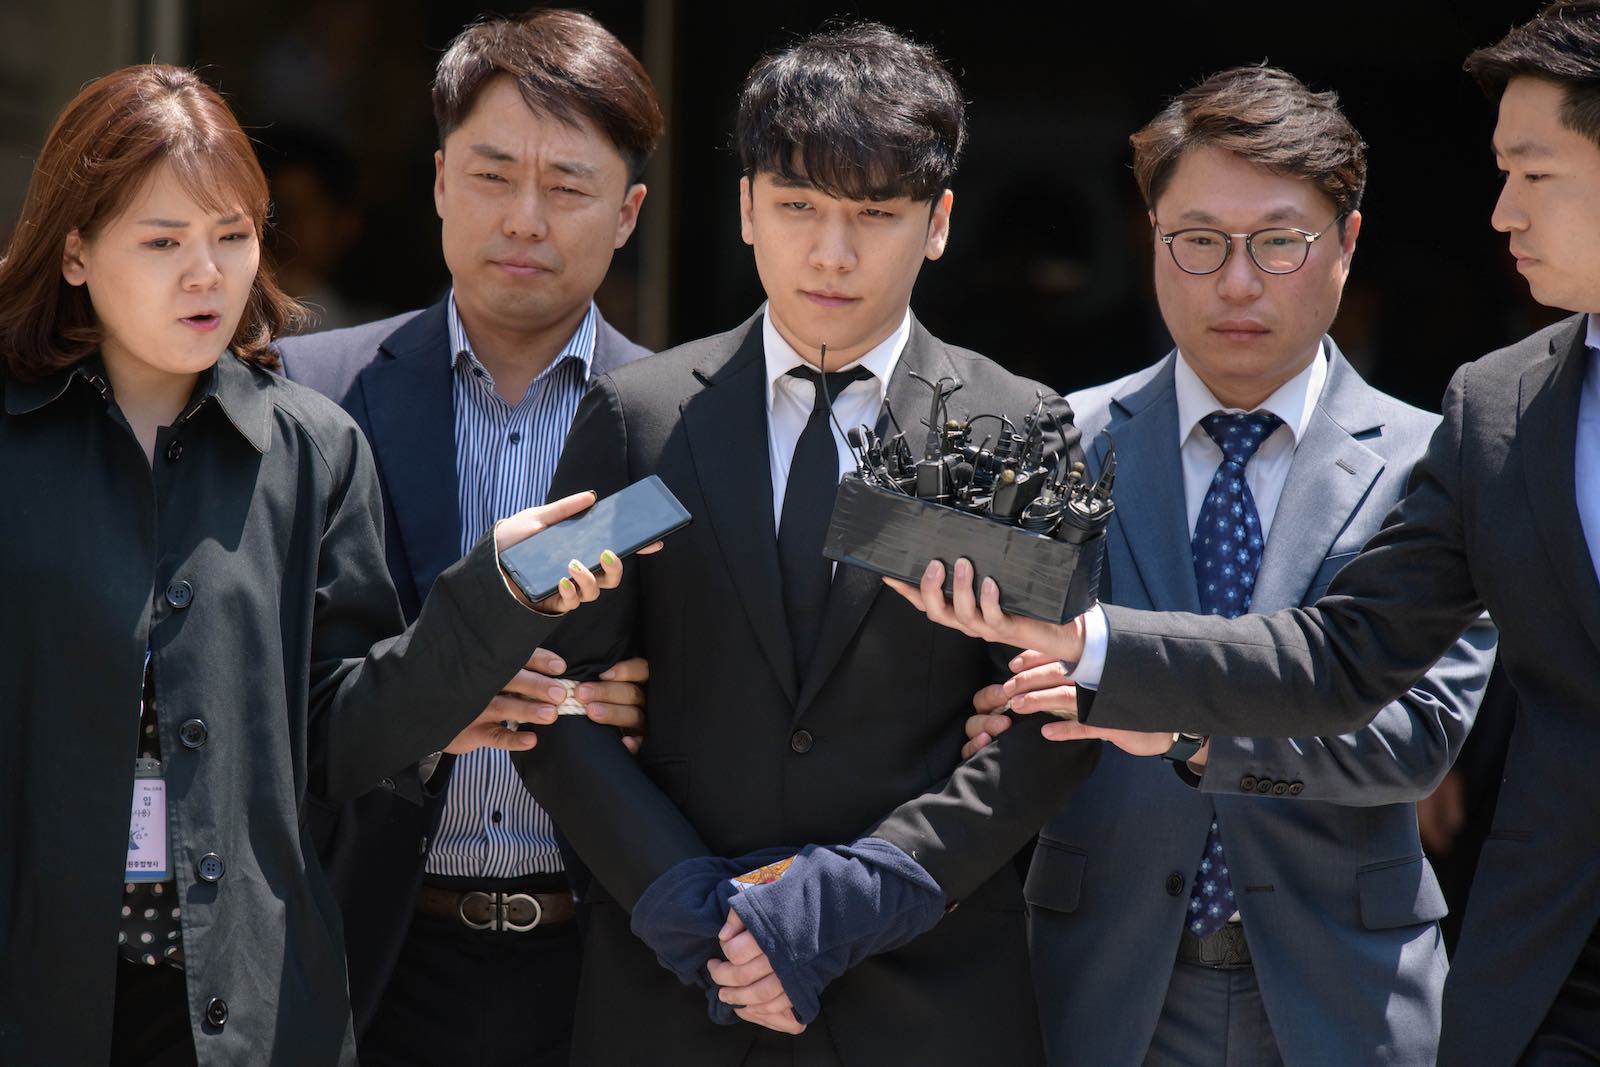 1600px x 1067px - The Burning Sun scandal that torched South Korea's elites | Lowy Institute